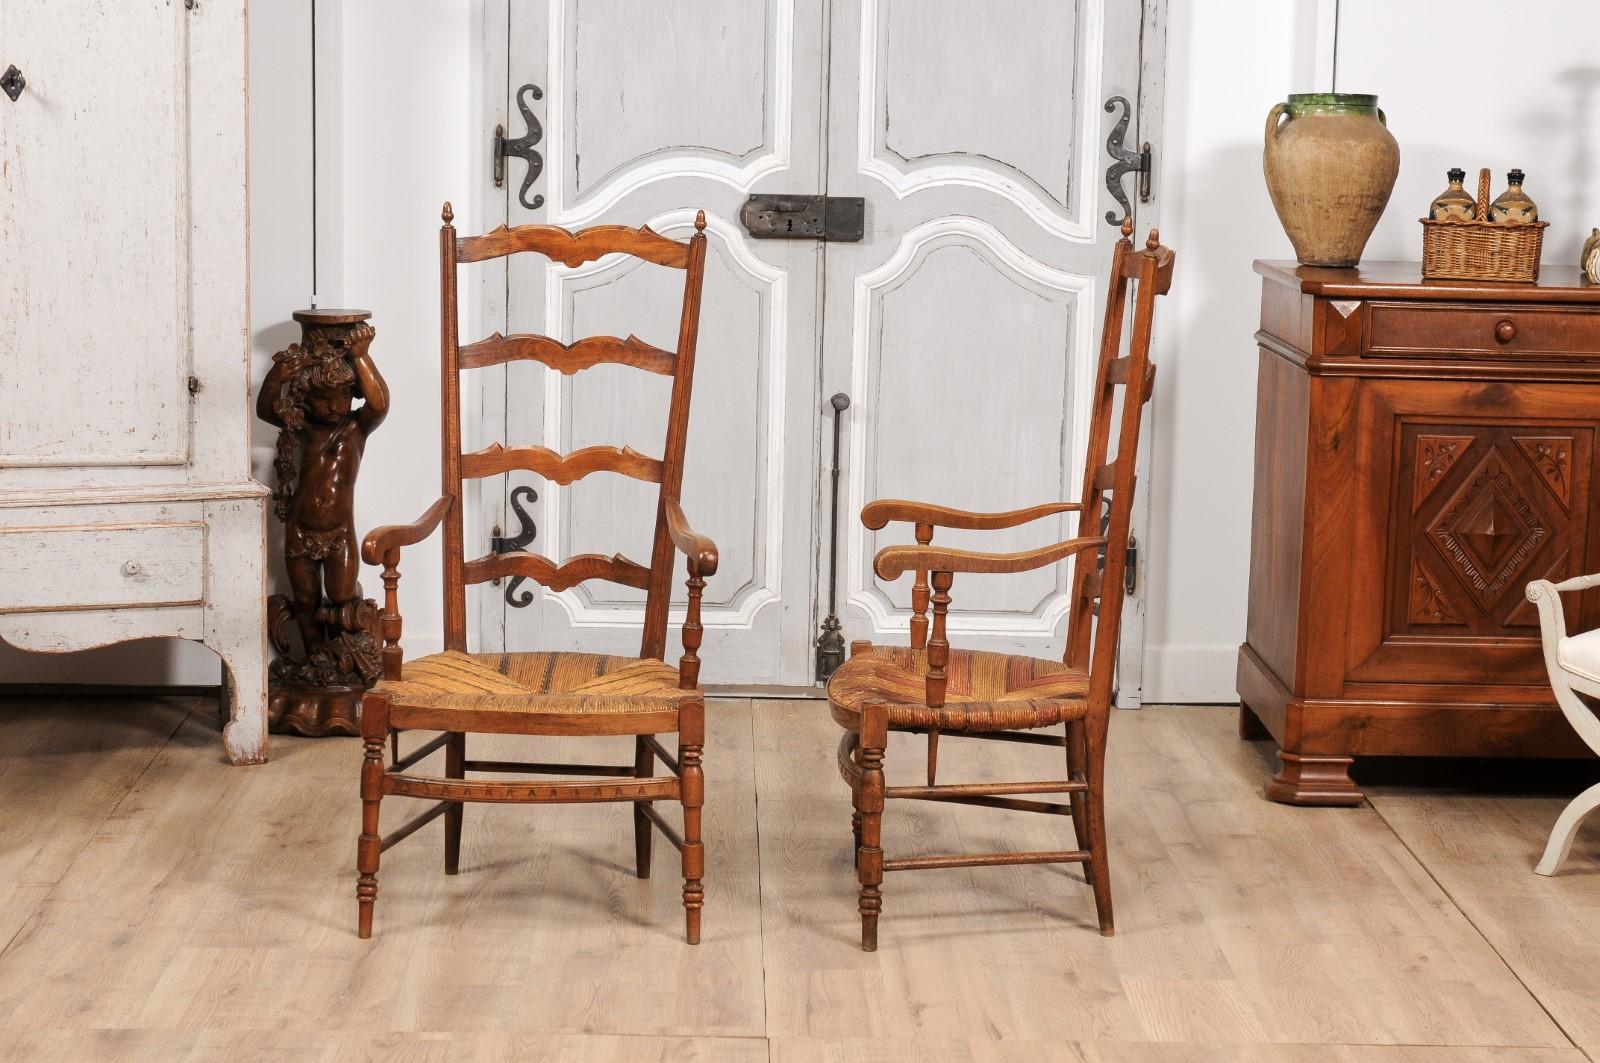 French 1890s Fruitwood Ladder Back Chairs with Straw Seats and Turned Legs For Sale 4